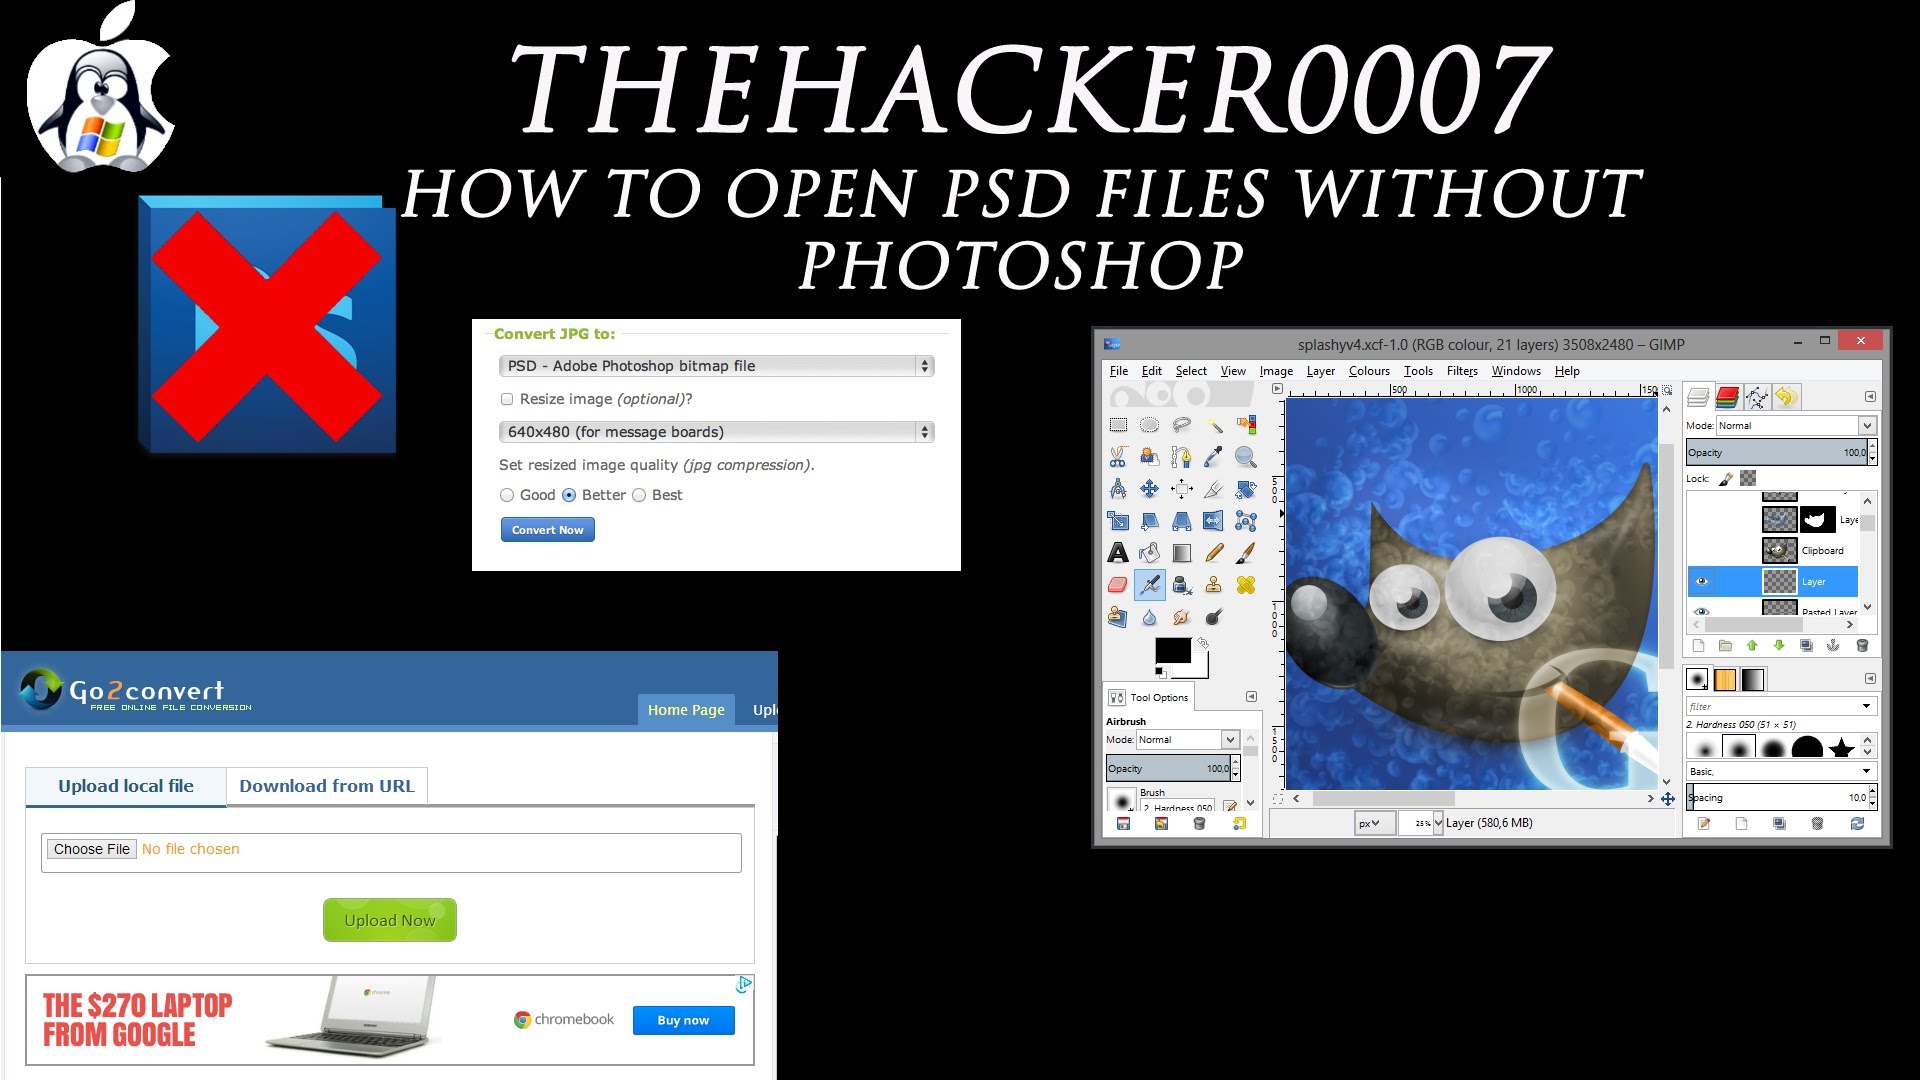 Open PSD Files without Photoshop